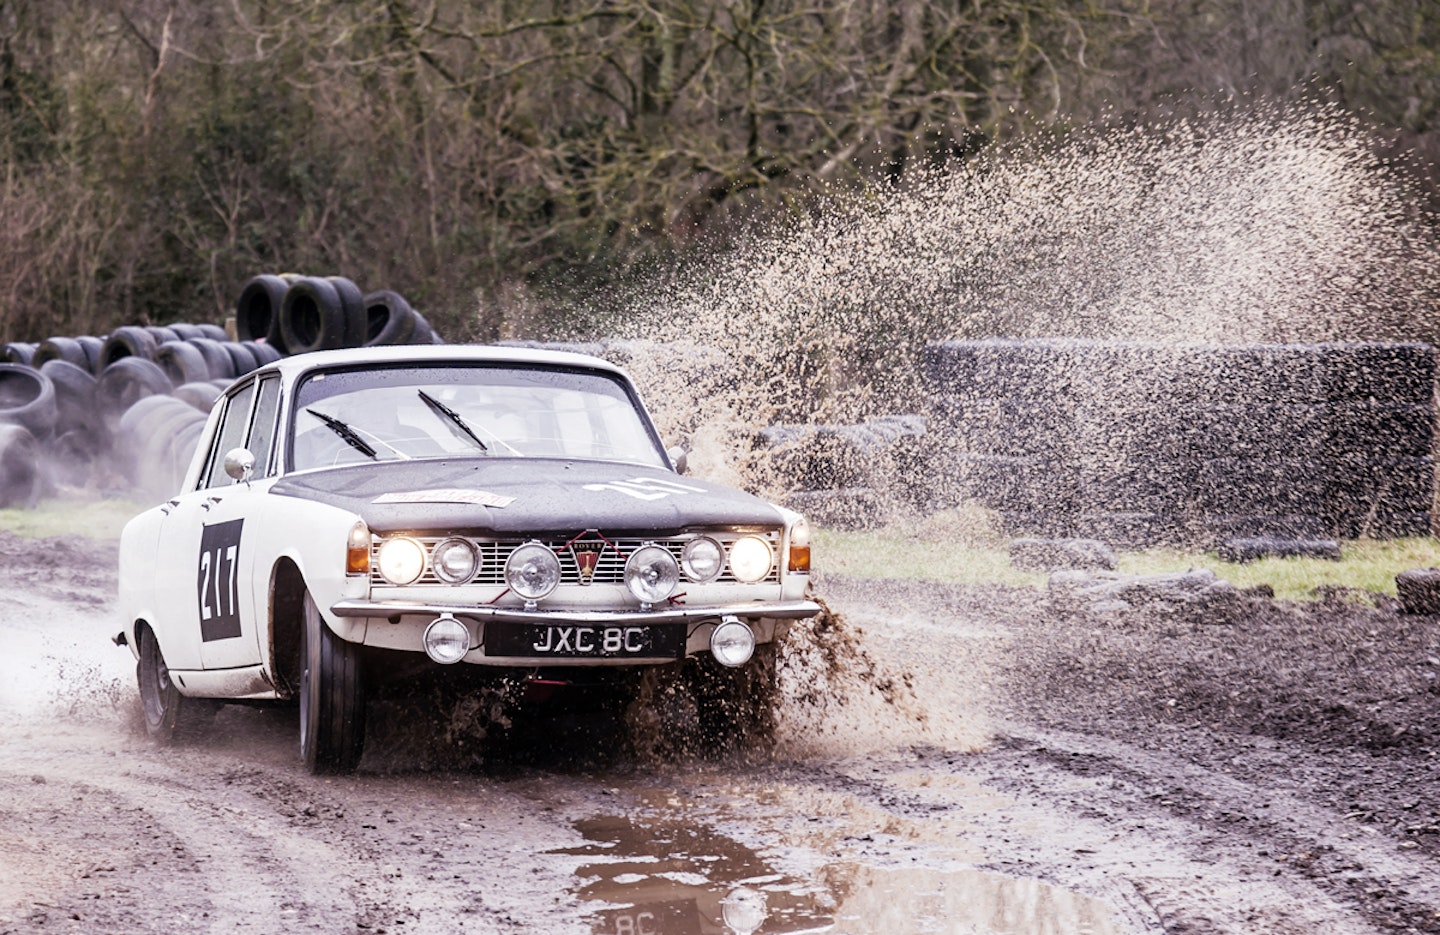 It’s been restored twice – but it’s a rally car, this is what it does best